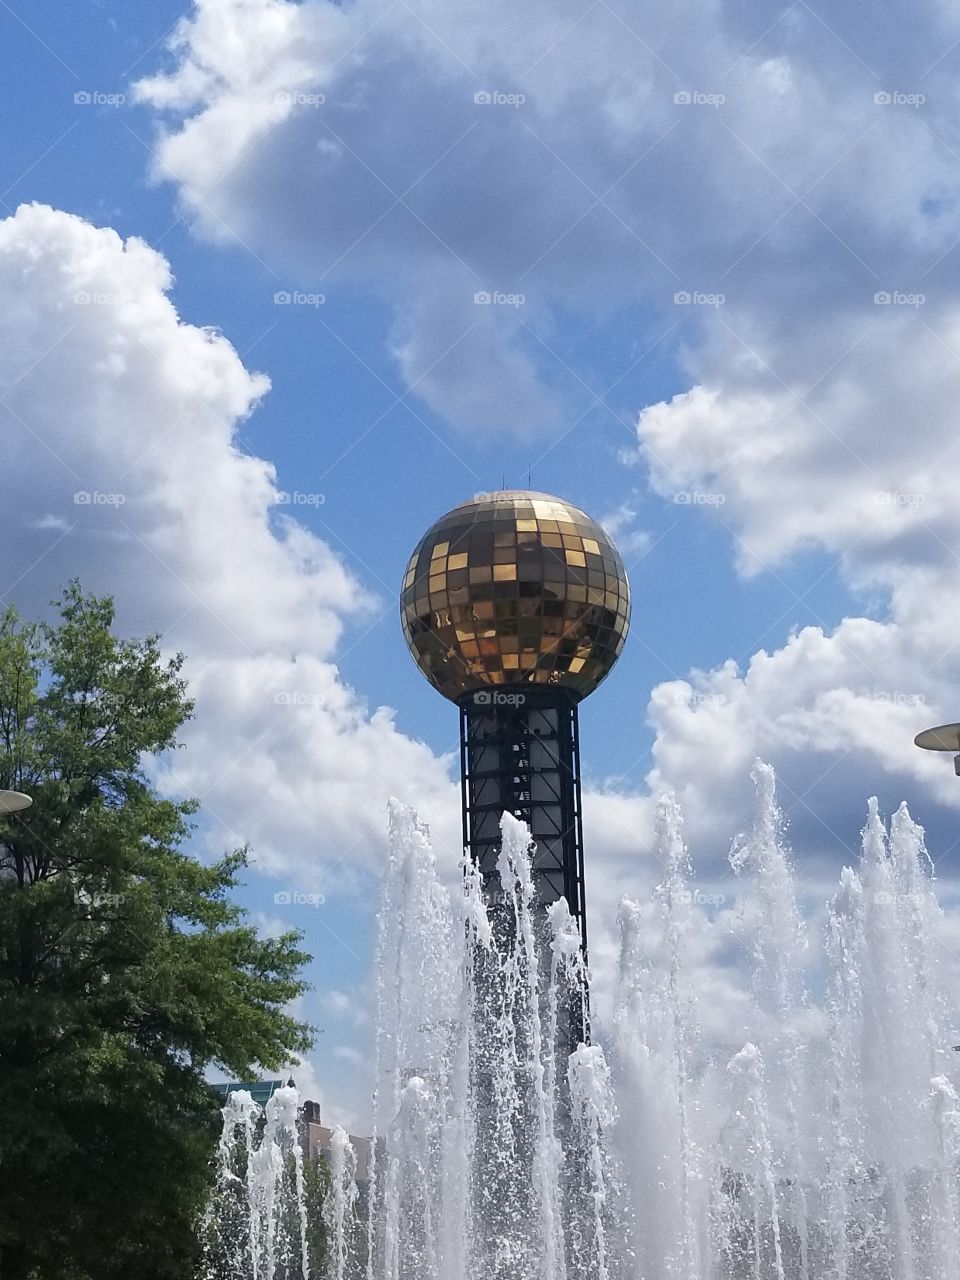 Sun Sphere in Knoxville with a fountain splashing up in front of it.